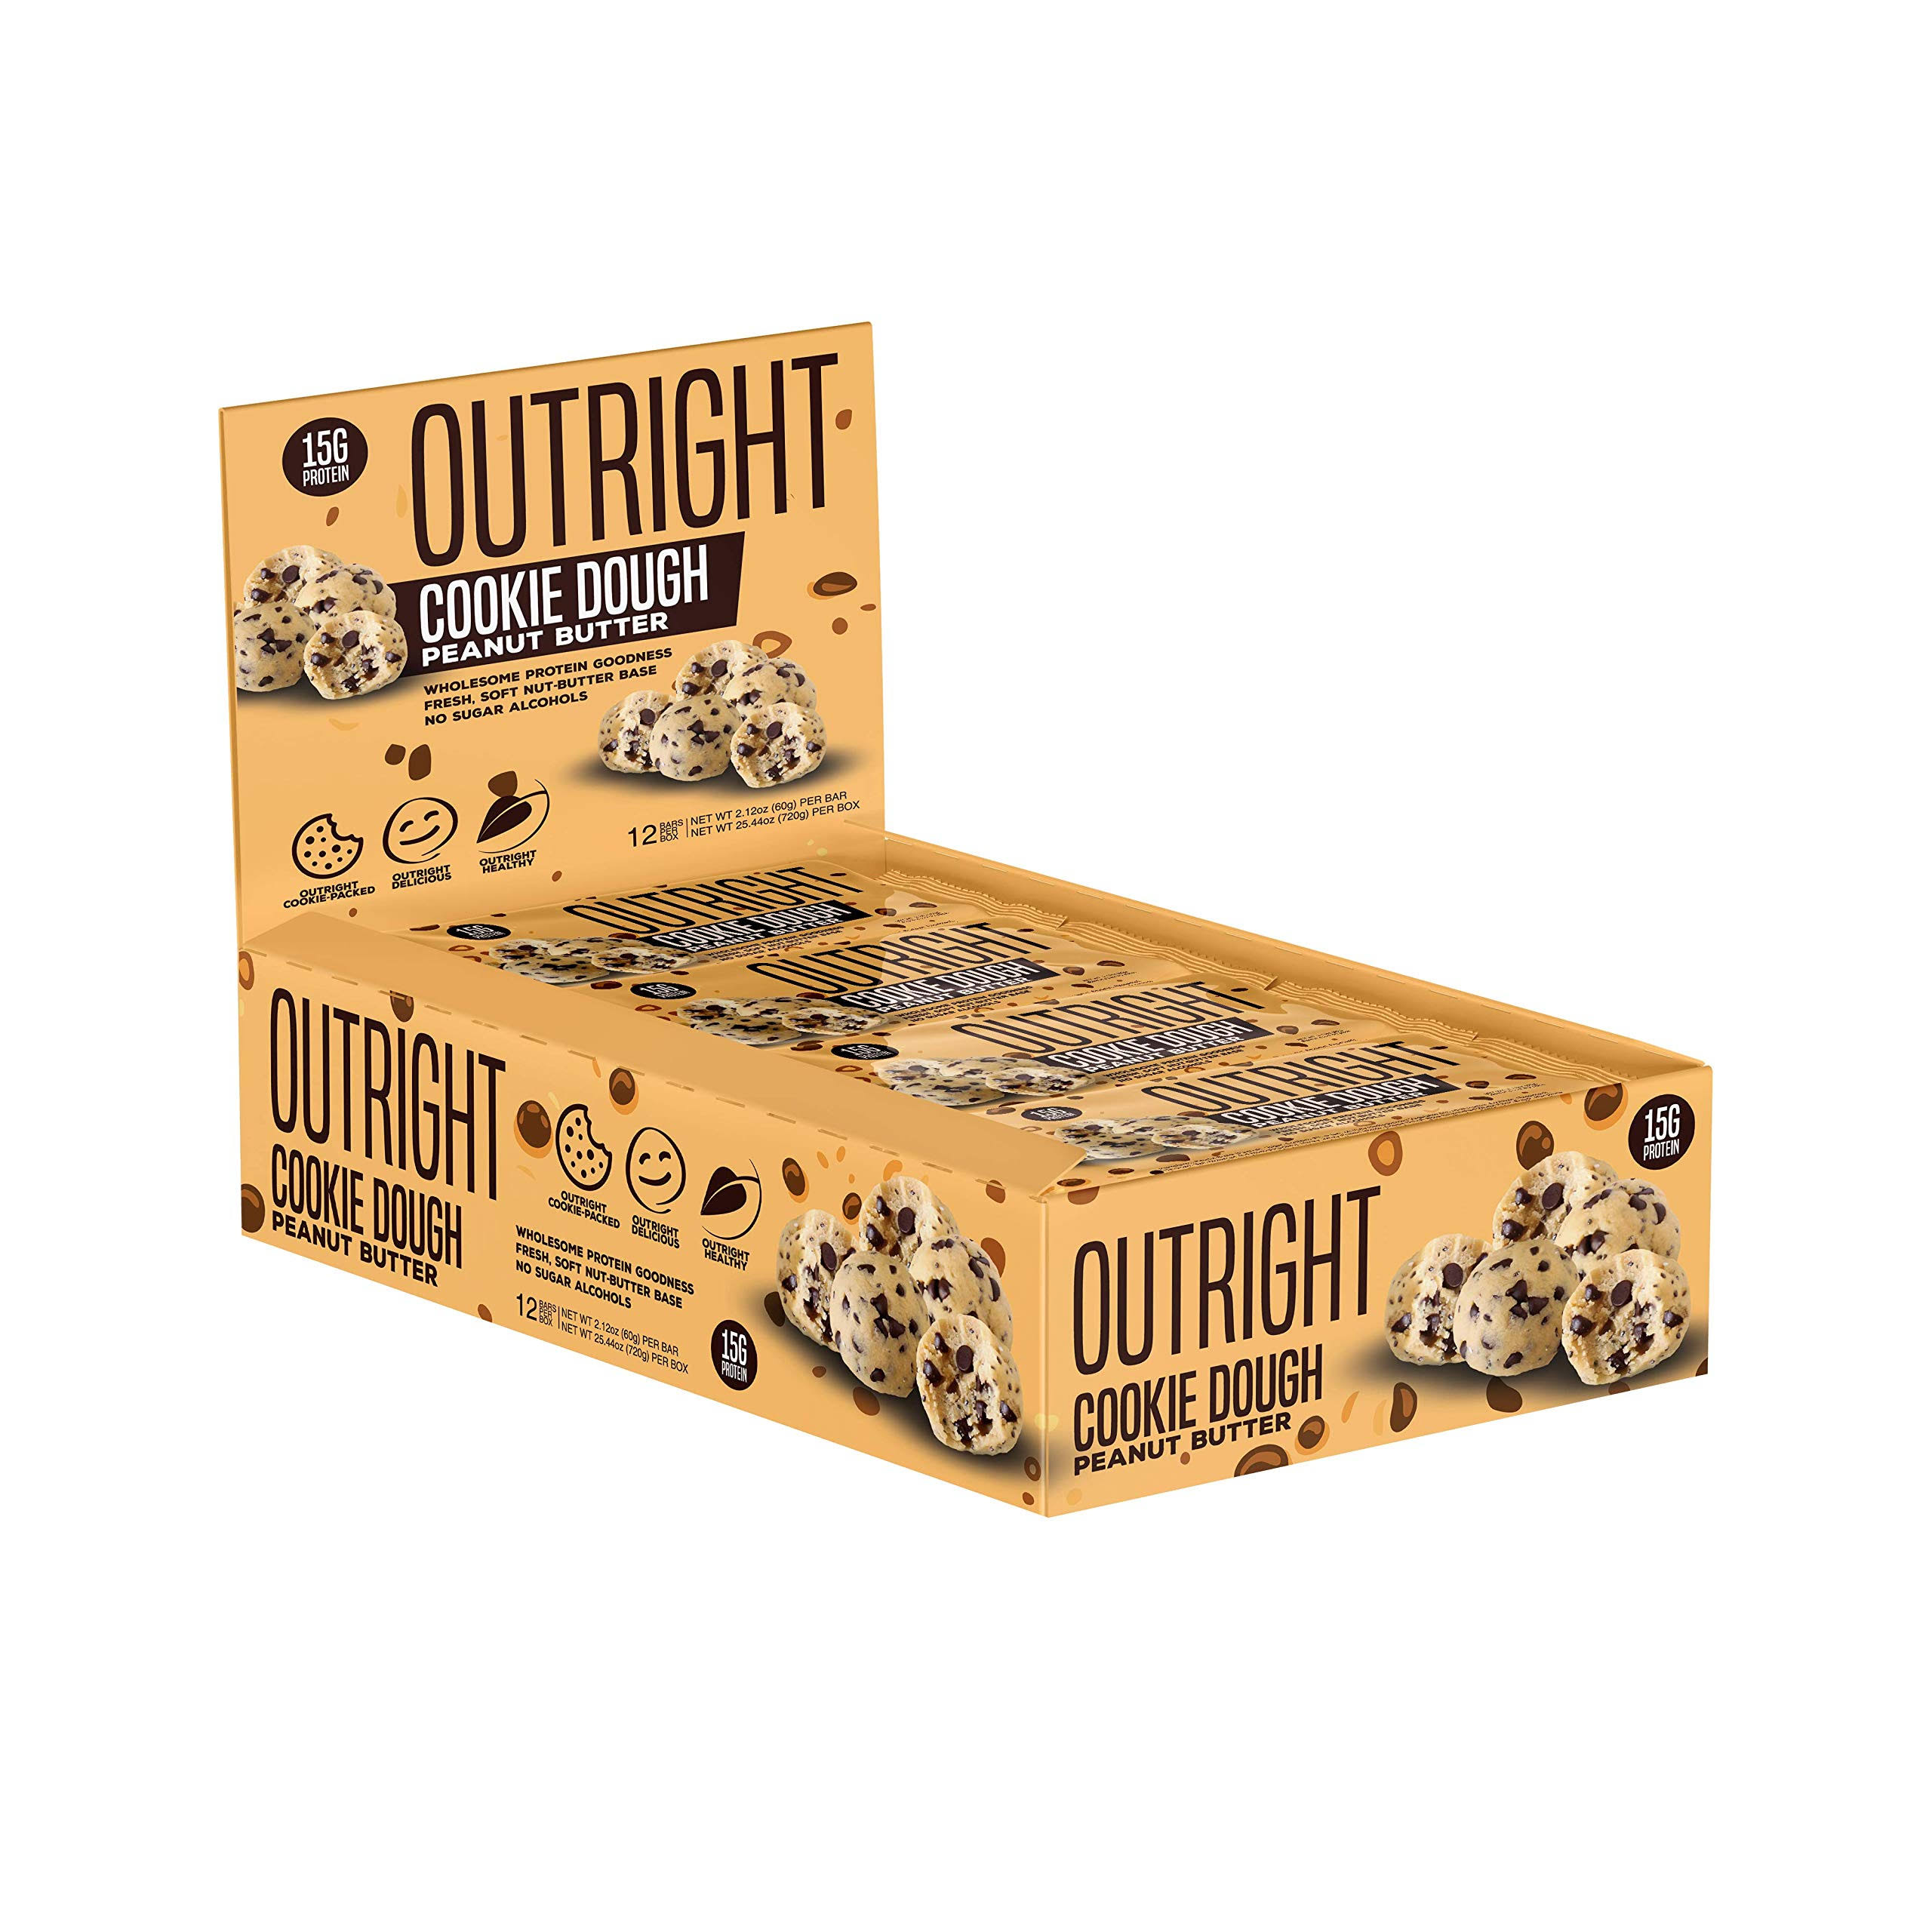 Outright Protein Bar - Cookie Dough Peanut Butter (12 Bars)